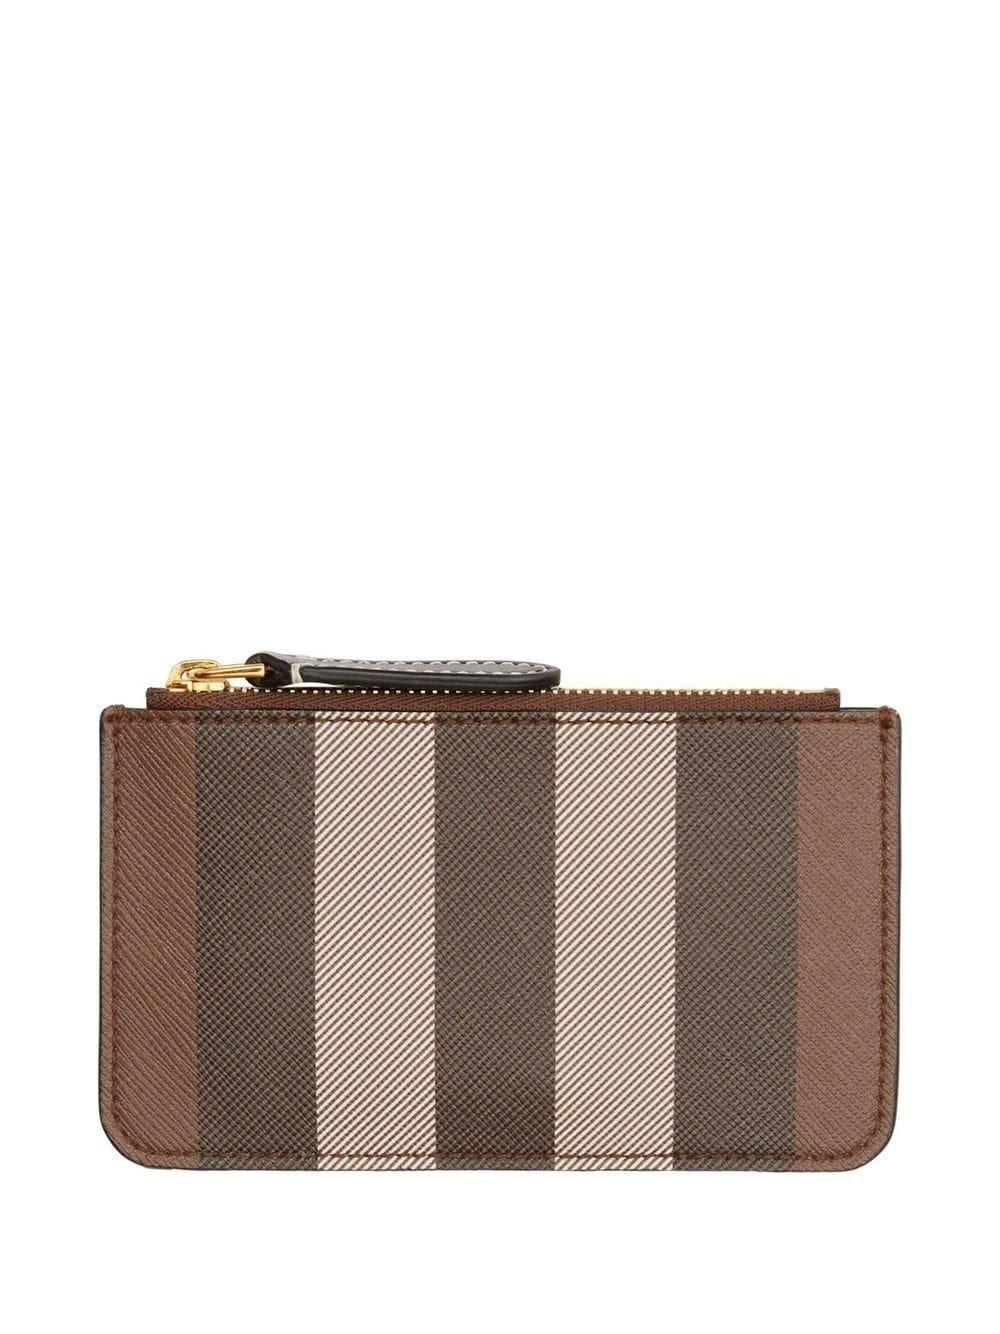 Burberry Striped Zipped Wallet